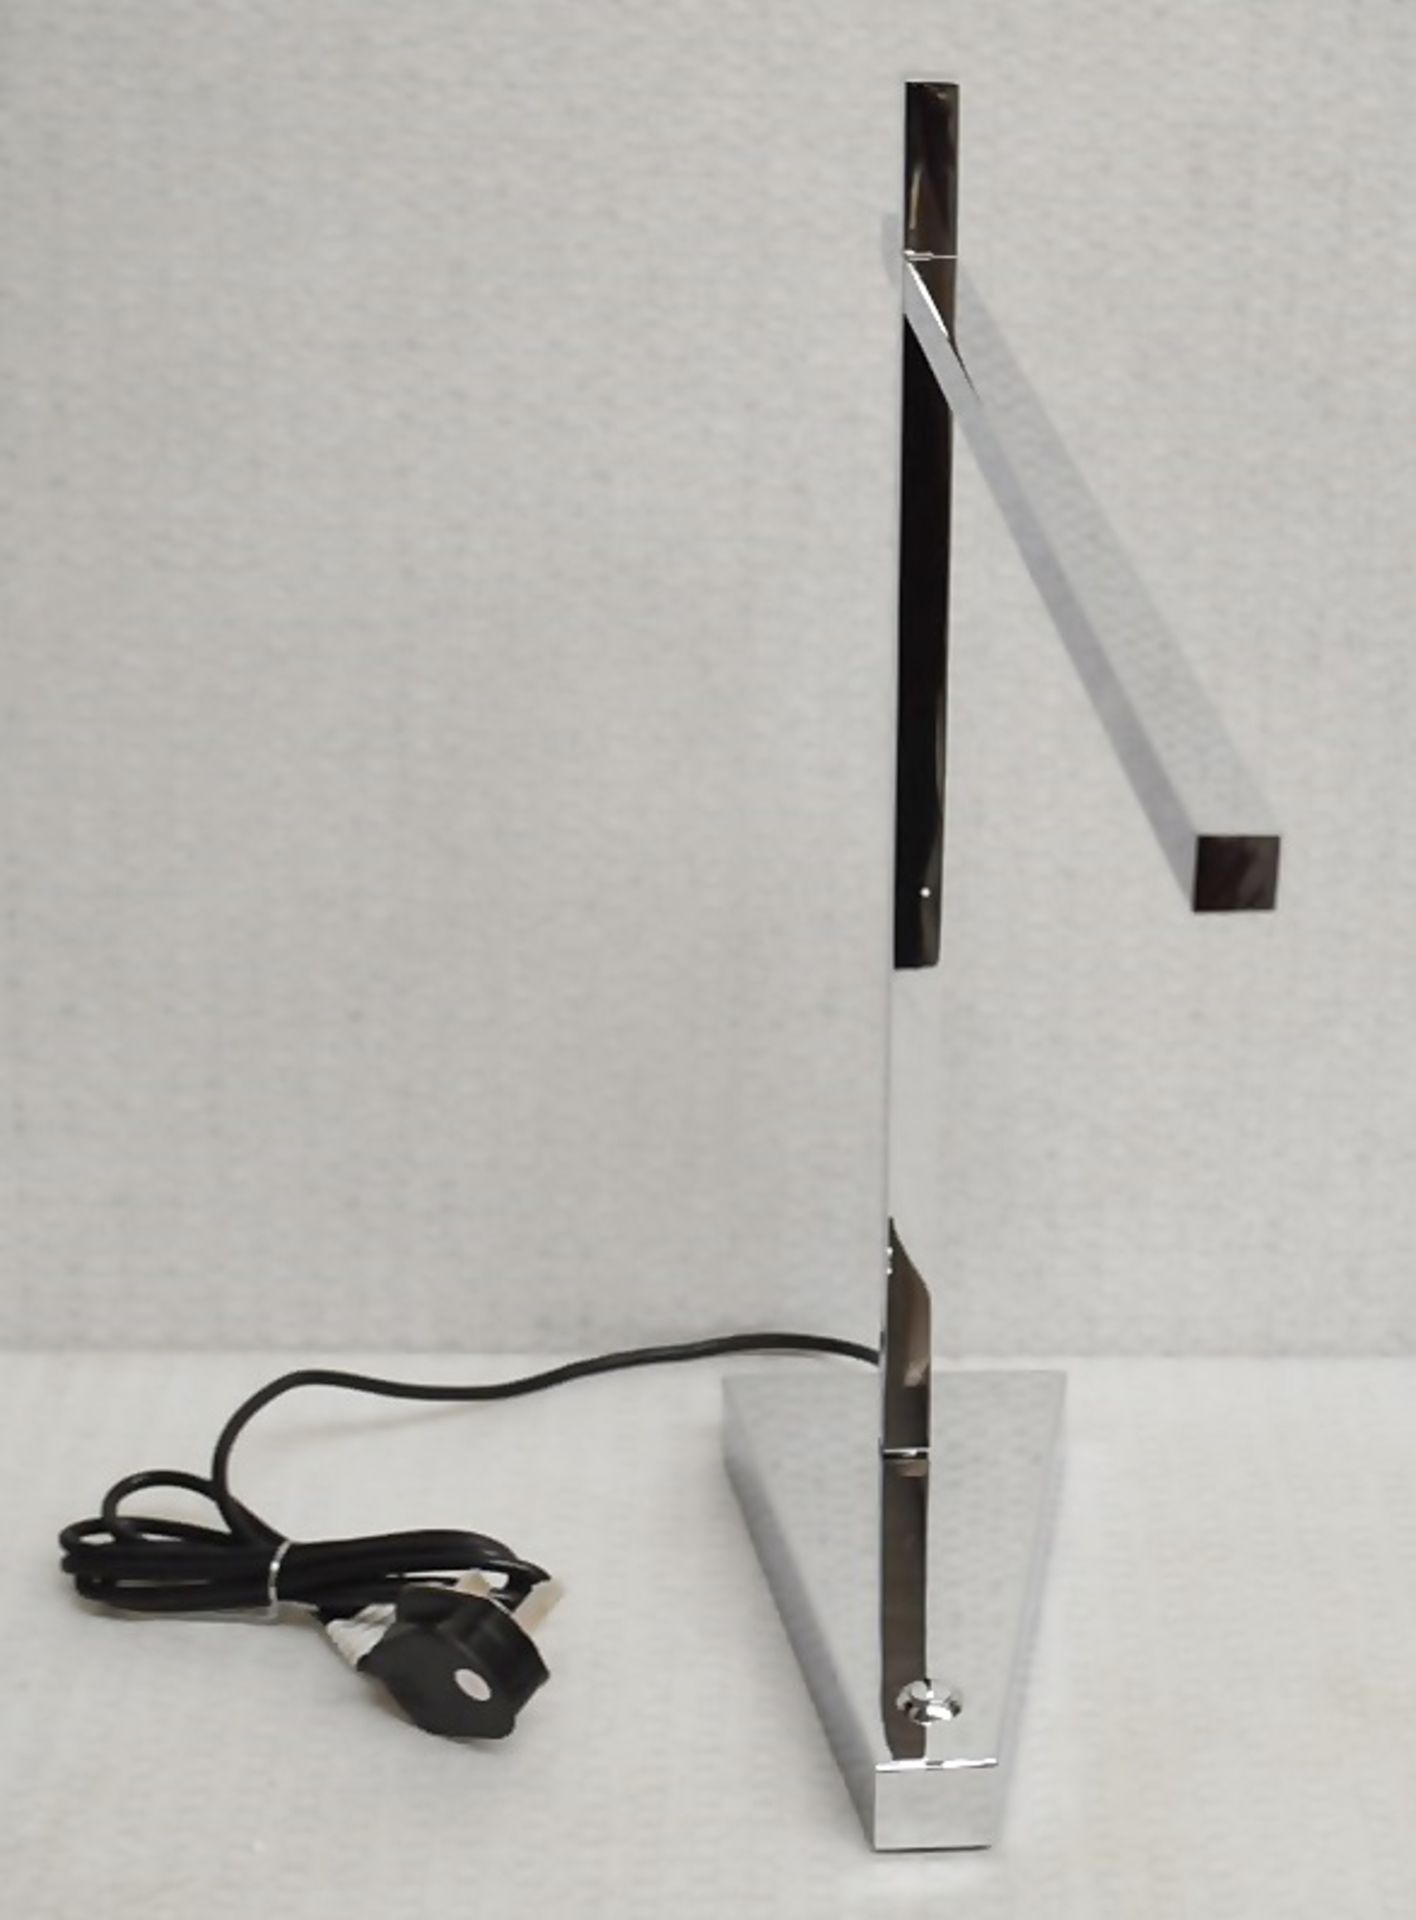 1 x CHELSOM 'Crane' Steel LED Desk Table Lamp With Directional Arm In A Chrome Finish - Unused Boxed - Image 5 of 10